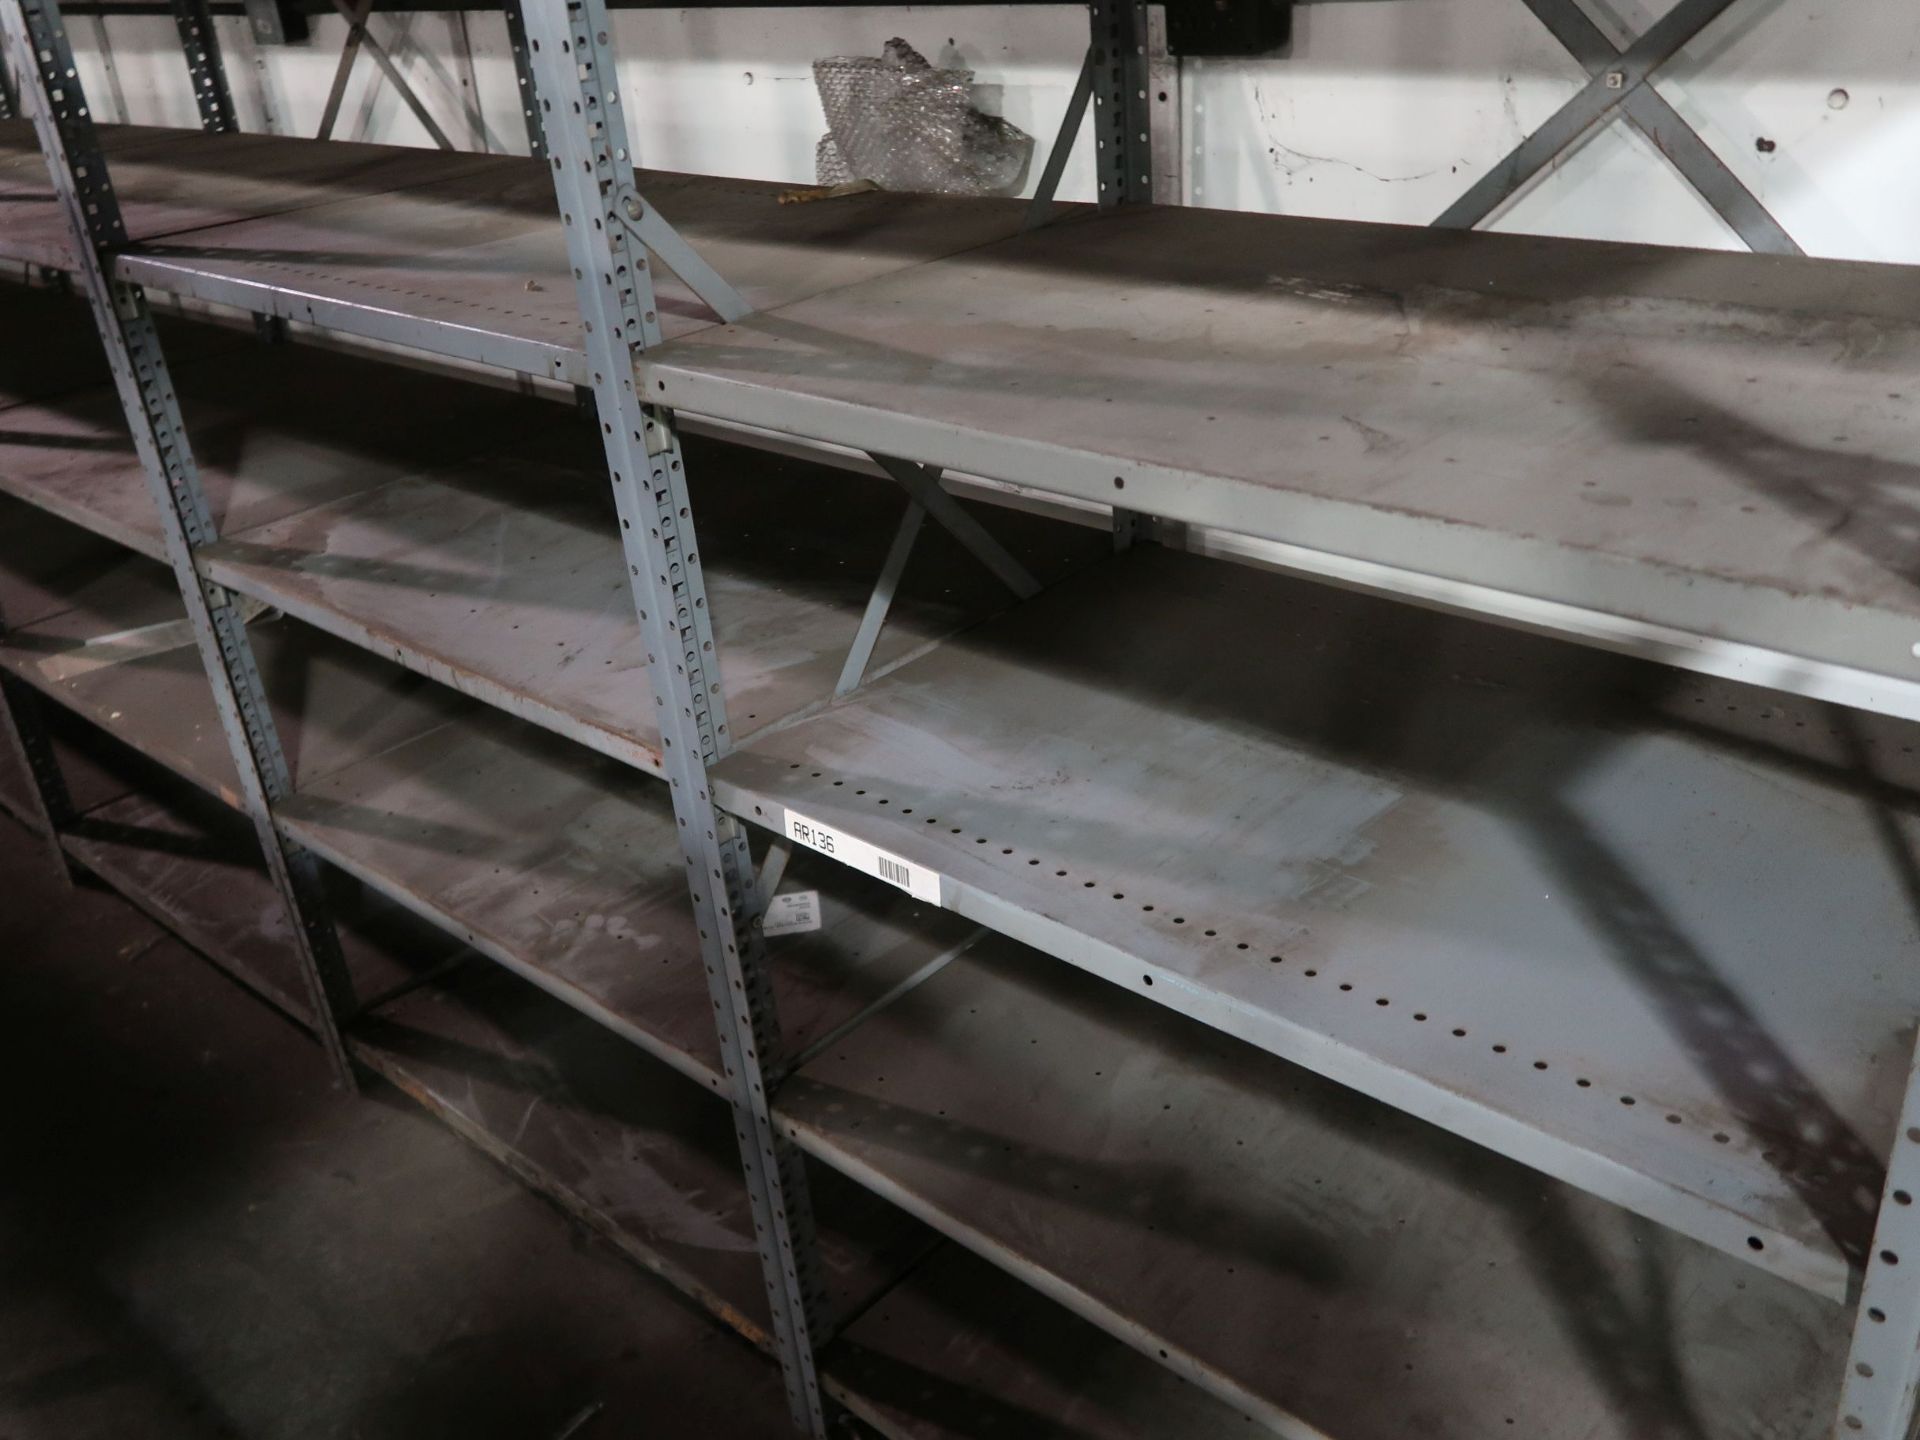 SECTIONS 24" X 36" X 85" STEEL SHELVES, (7) SHELVES PER SECTION - Image 2 of 3